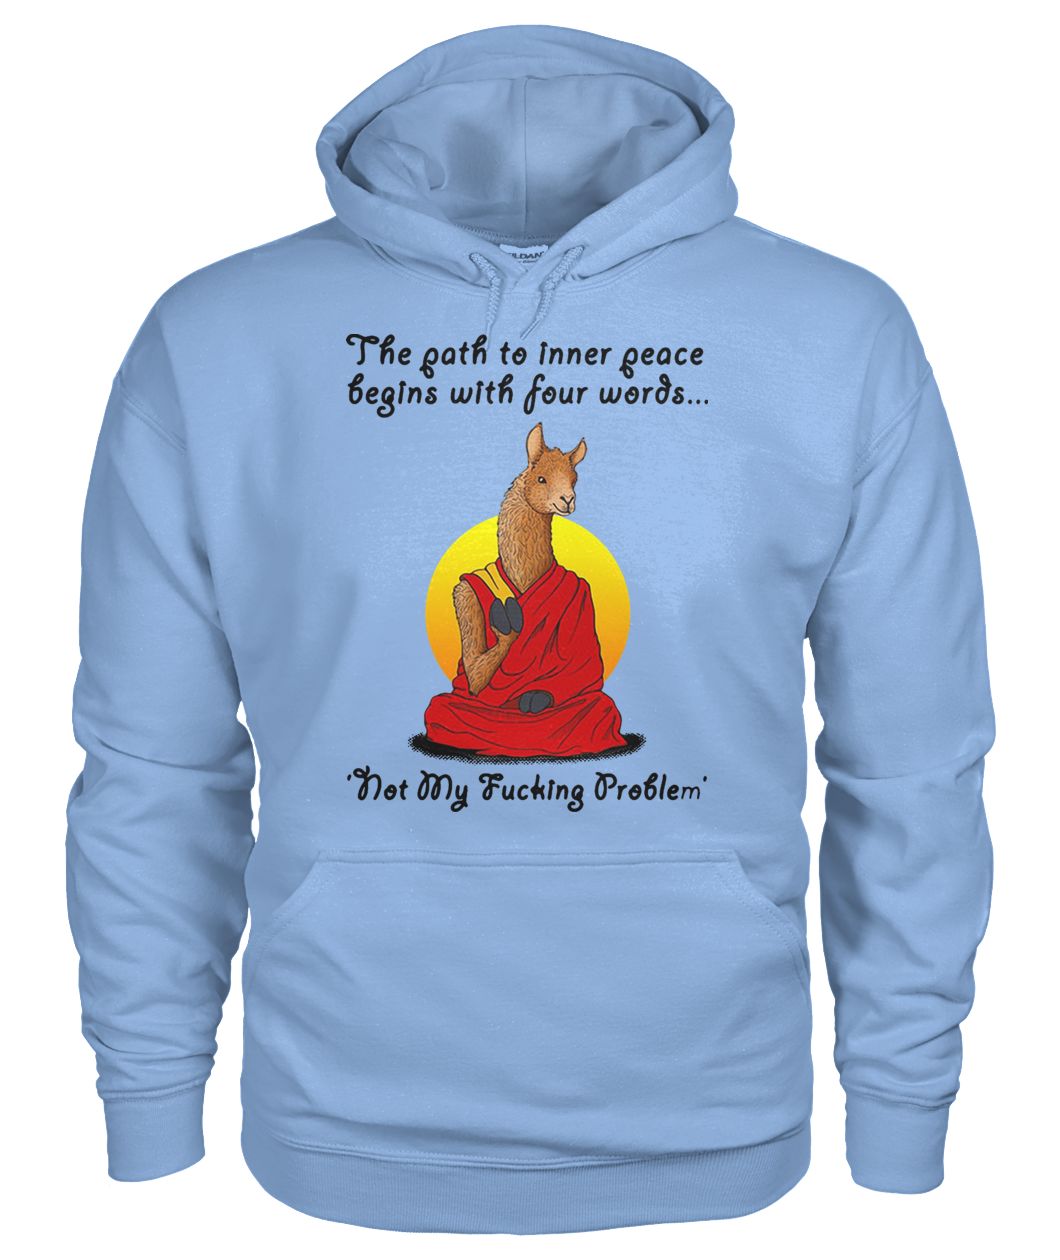 Llama the path to inner peace begin with four words not my fucking problem gildan hoodie